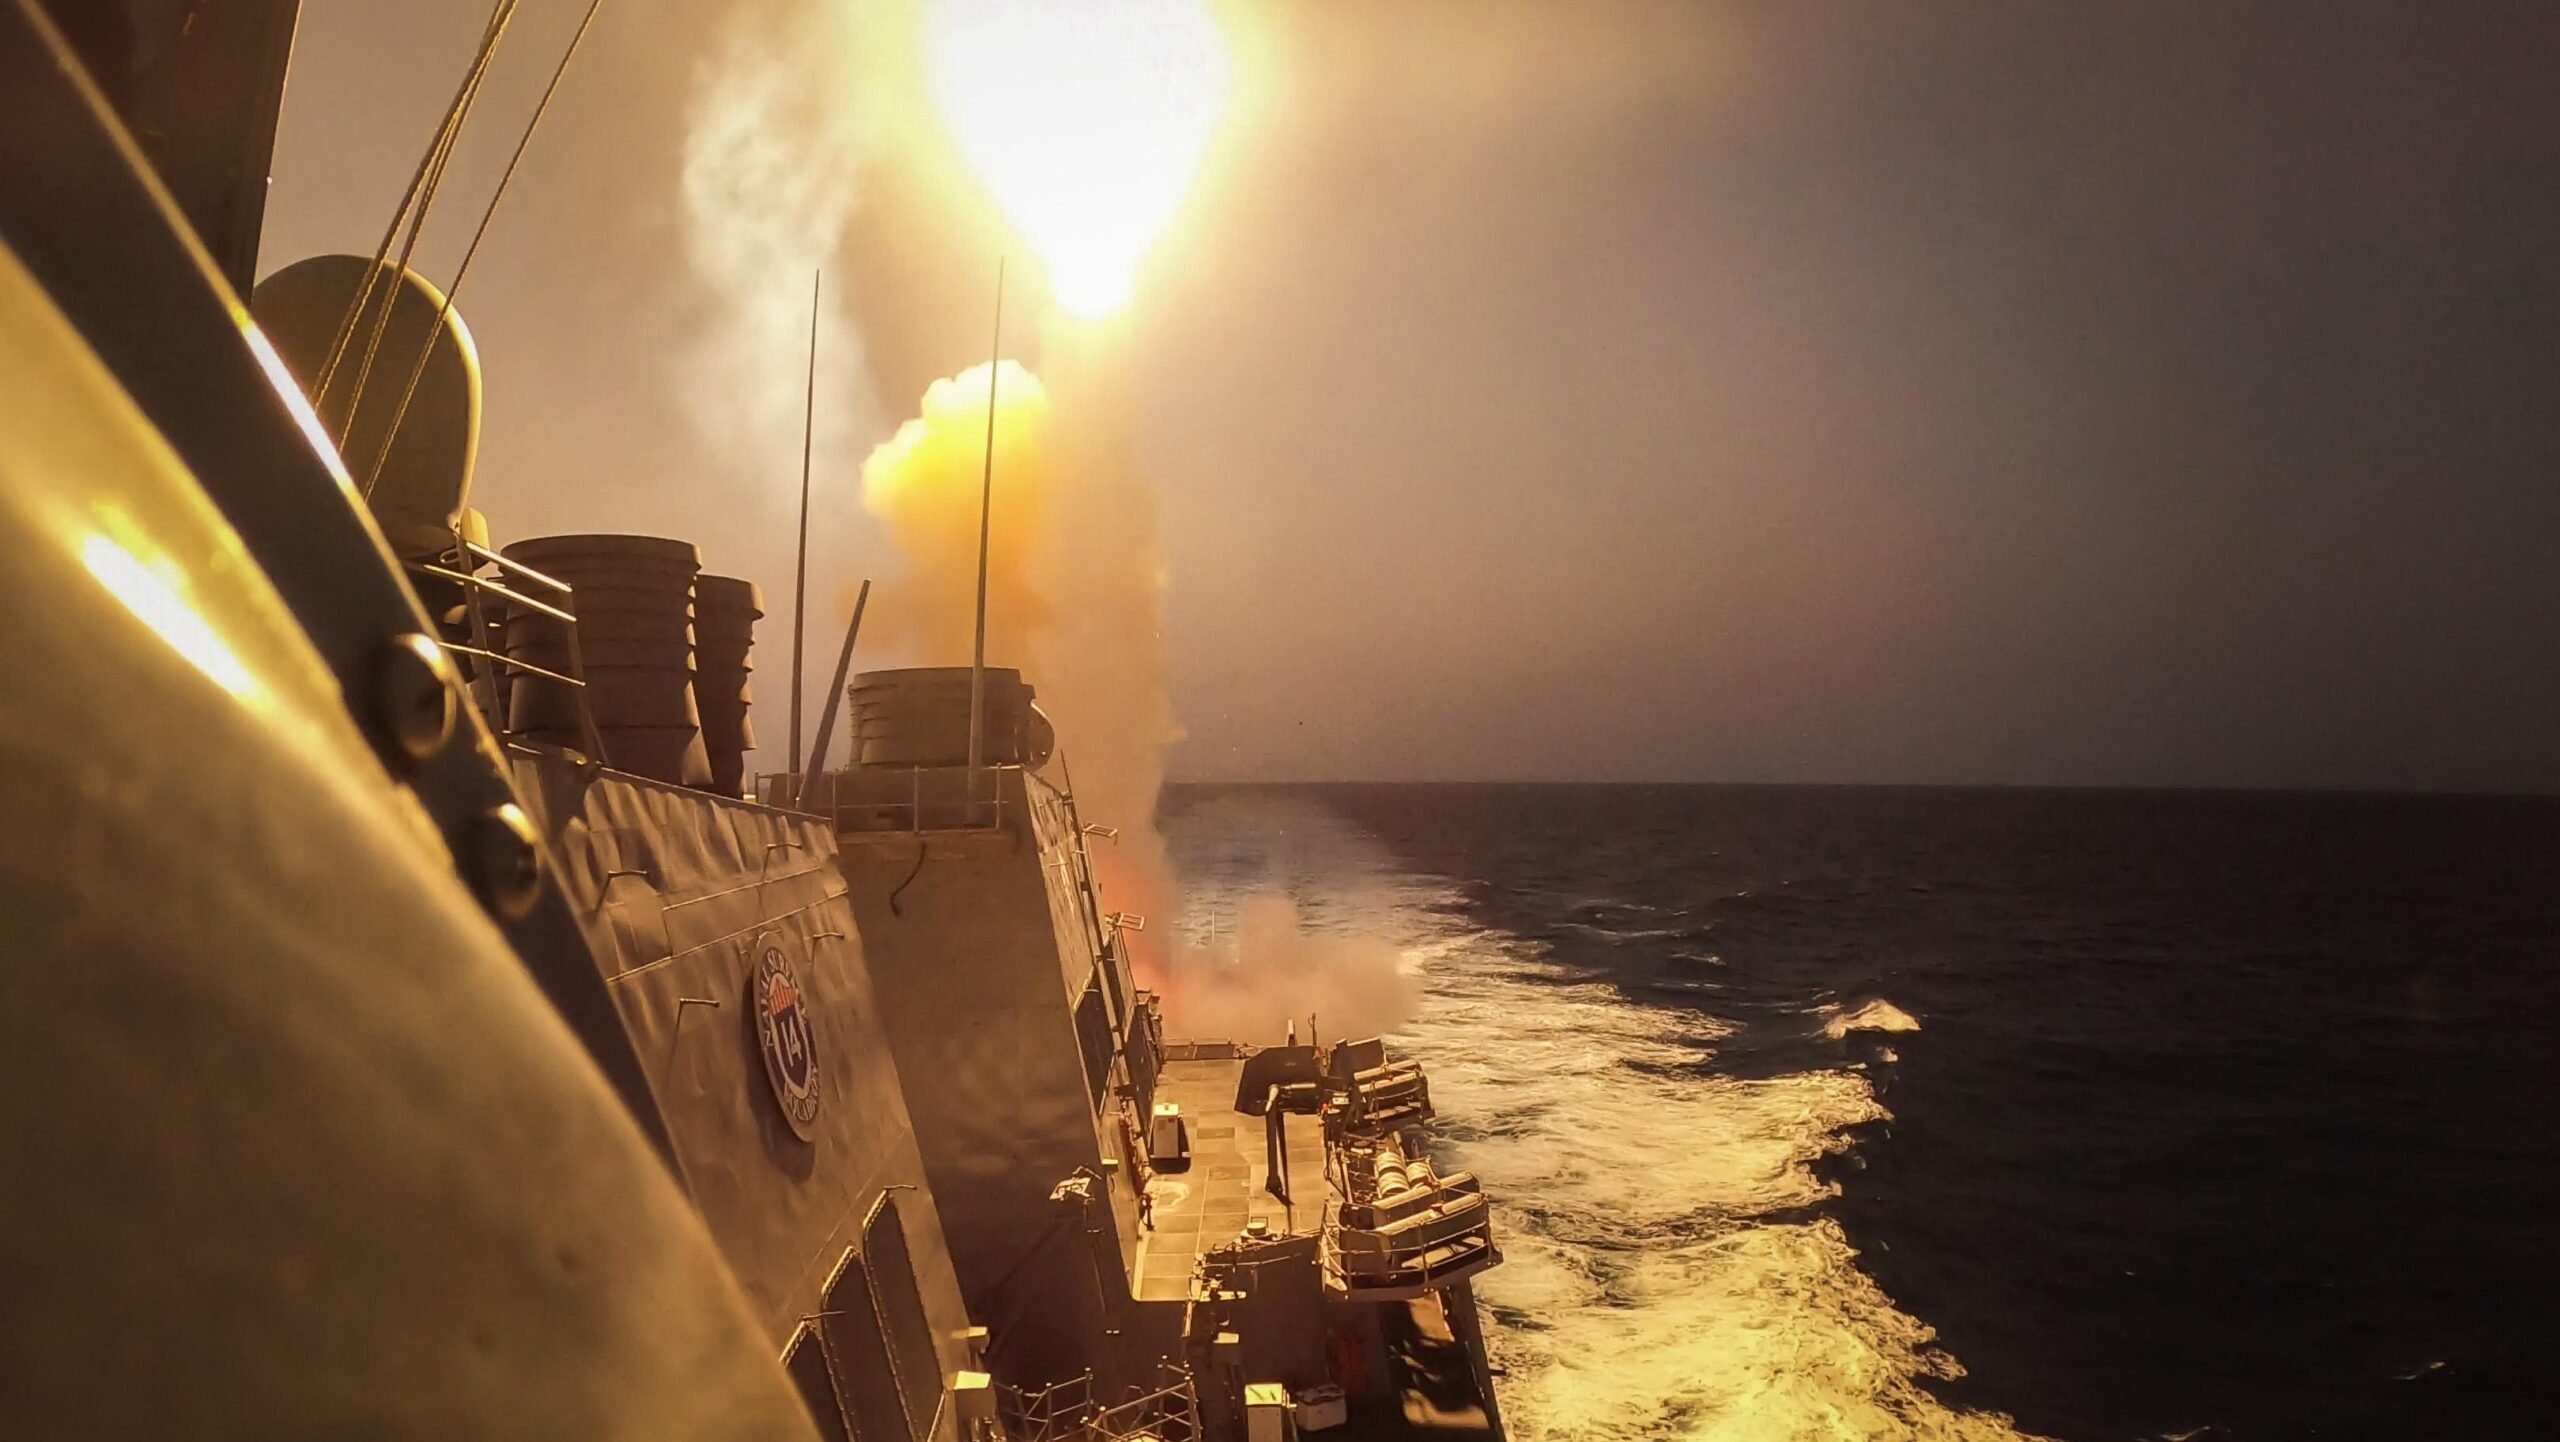 ‘Here and now’: CNO Franchetti on the looming munitions issue for ships in Middle East